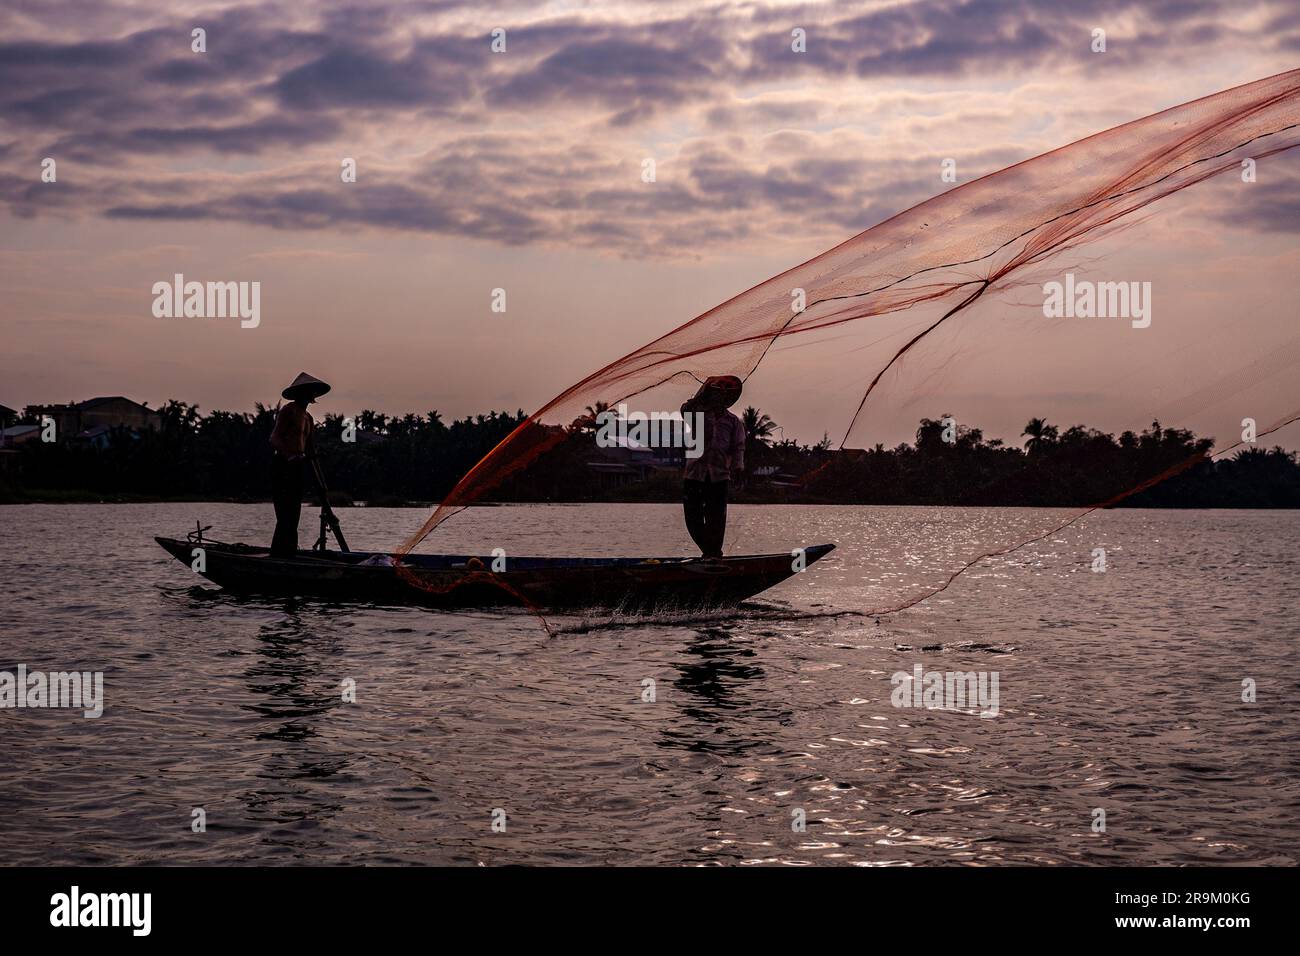 https://c8.alamy.com/comp/2R9M0KG/vietnamese-fisherman-throwing-a-net-to-catch-food-for-the-village-2R9M0KG.jpg